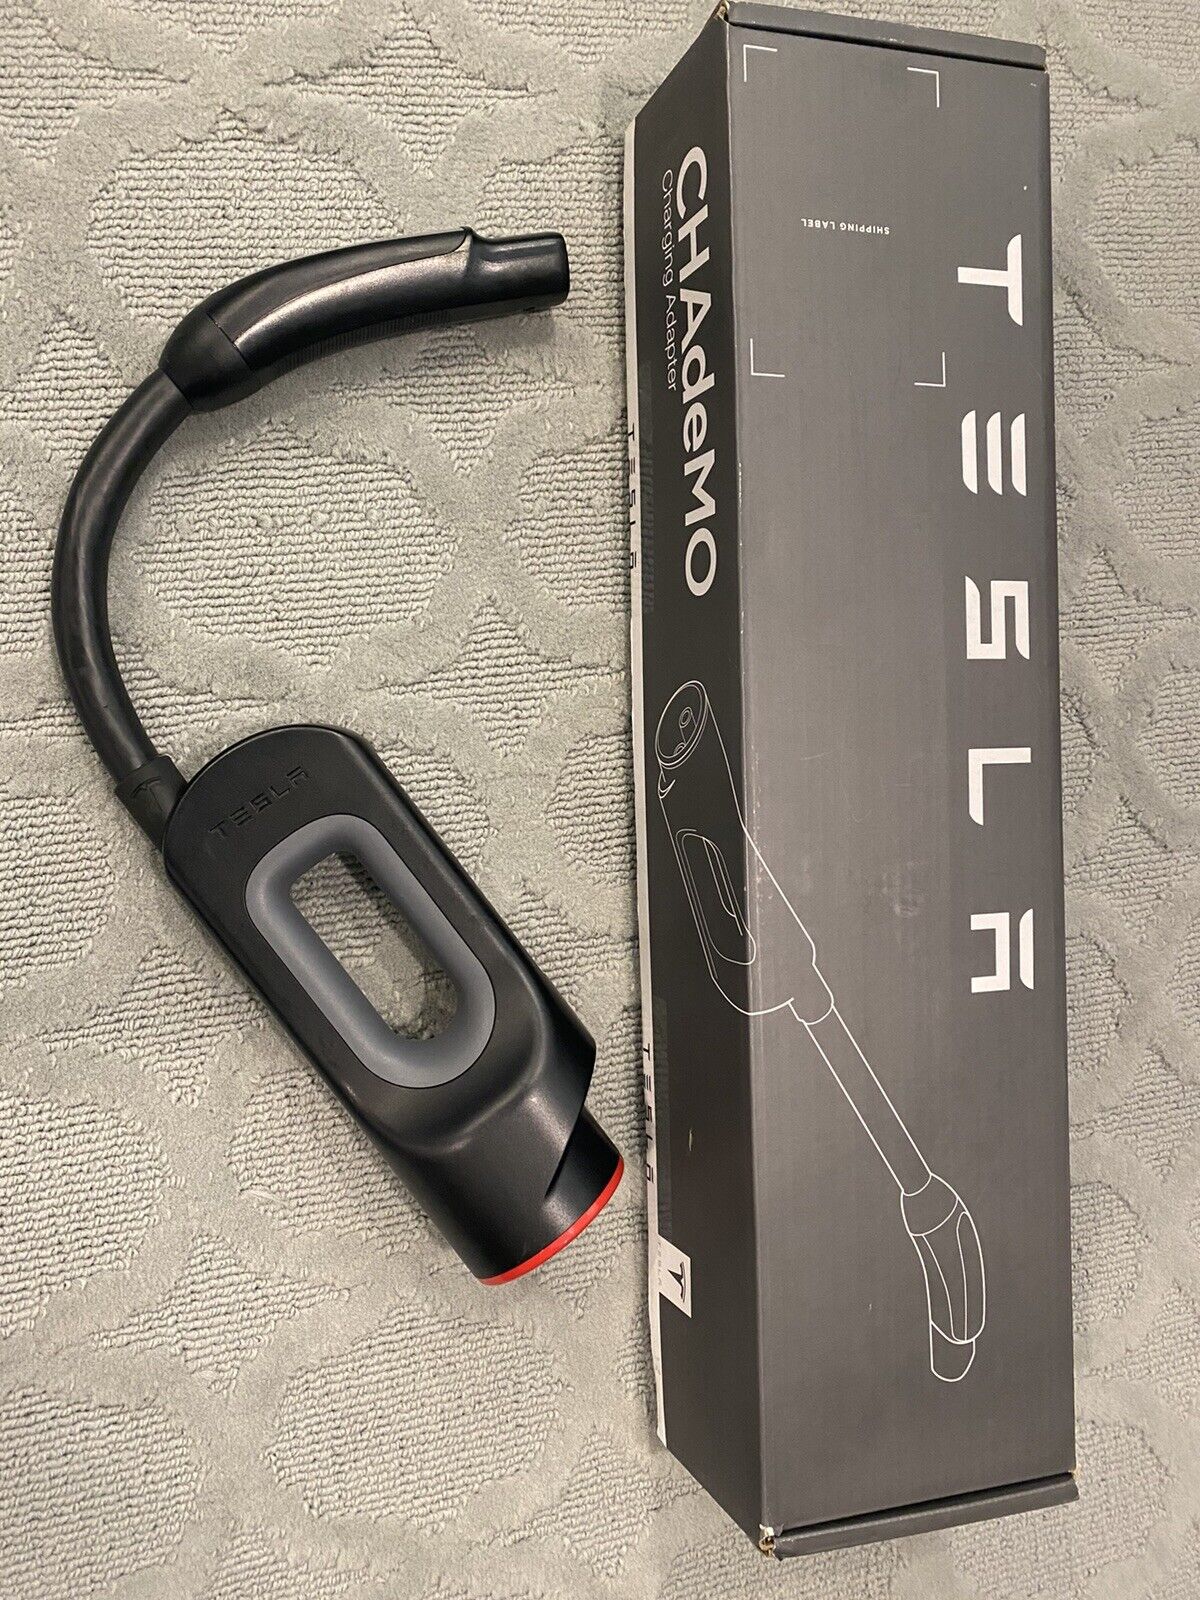 Authentic Tesla Chademo Adapter Charger for Tesla Model 3 S X Y. Barely Used